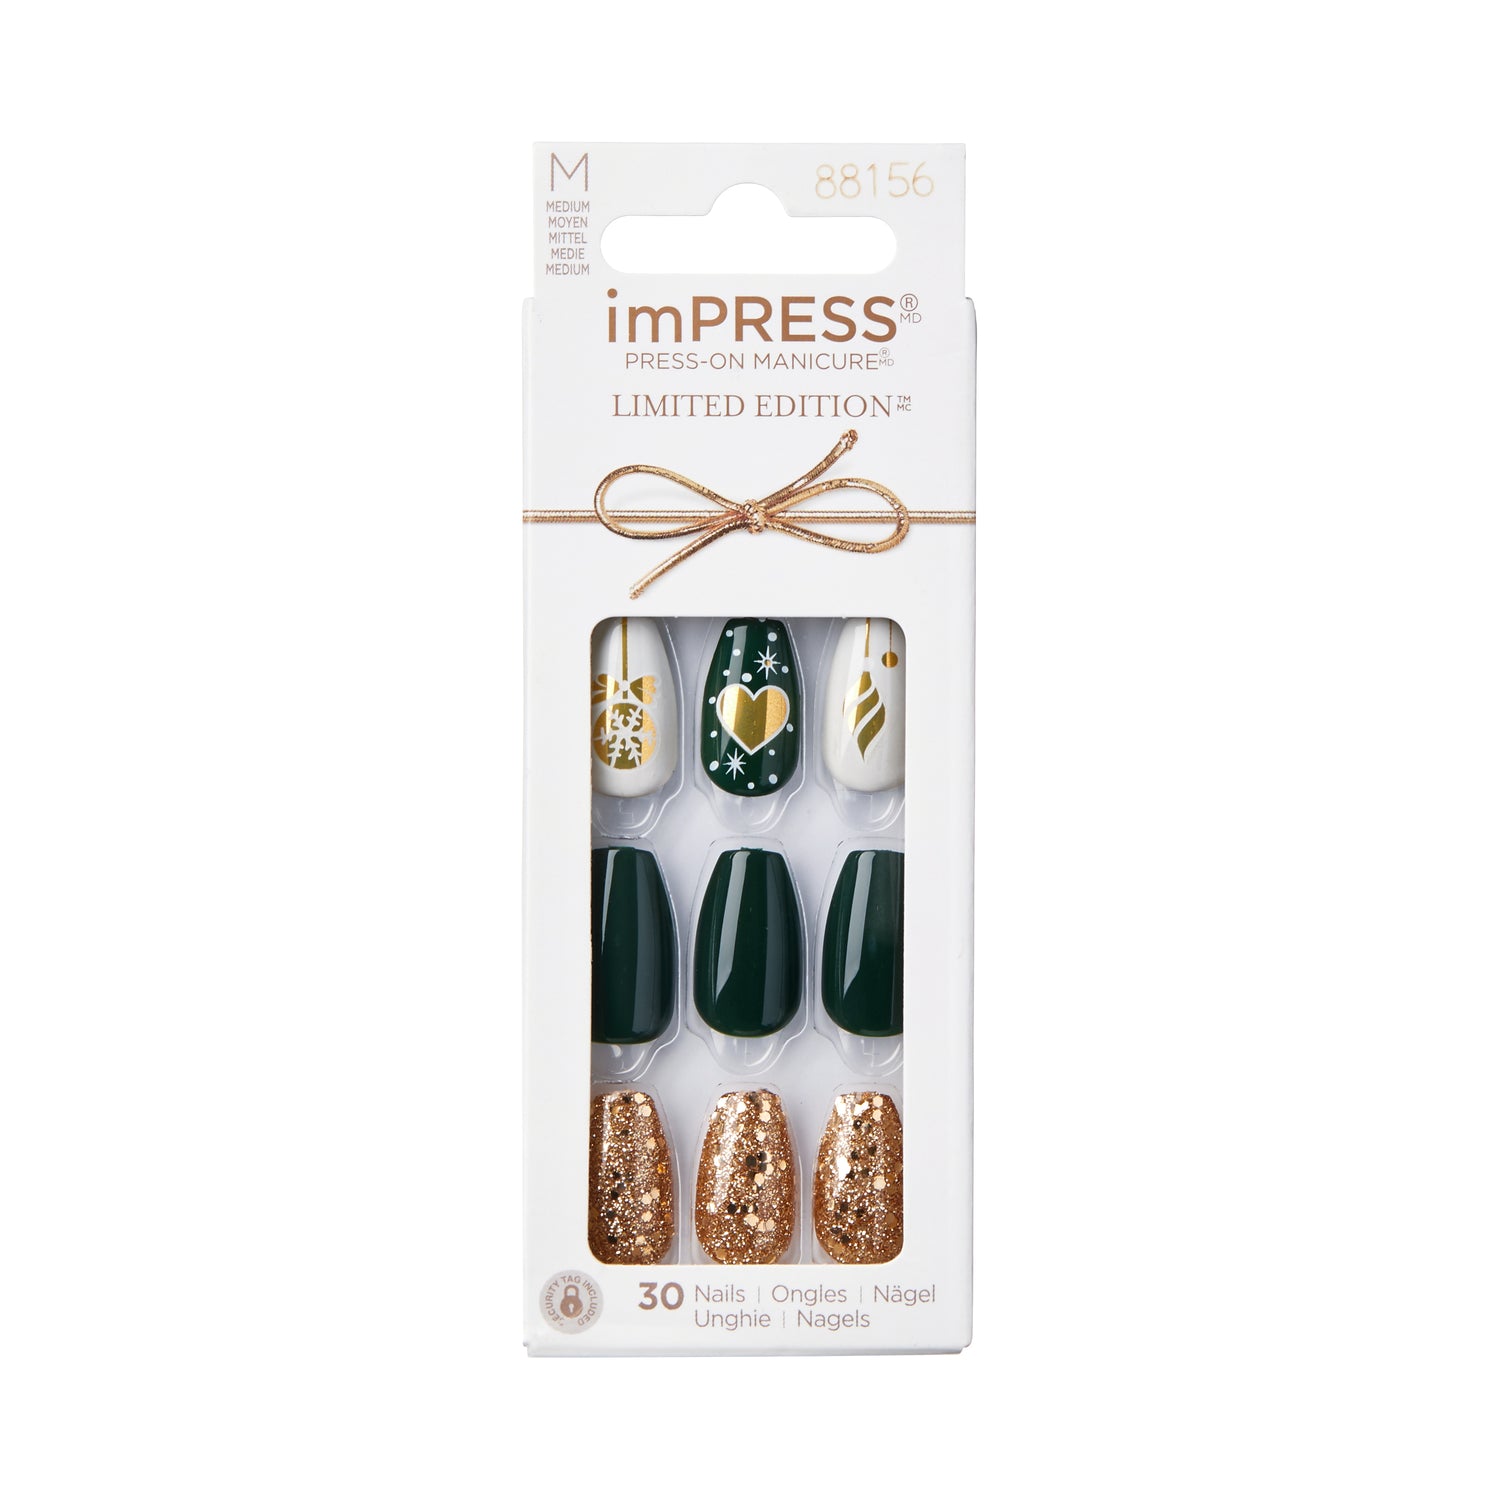 imPRESS Limited-Edition Holiday Press-On Nails - Deck the Halls